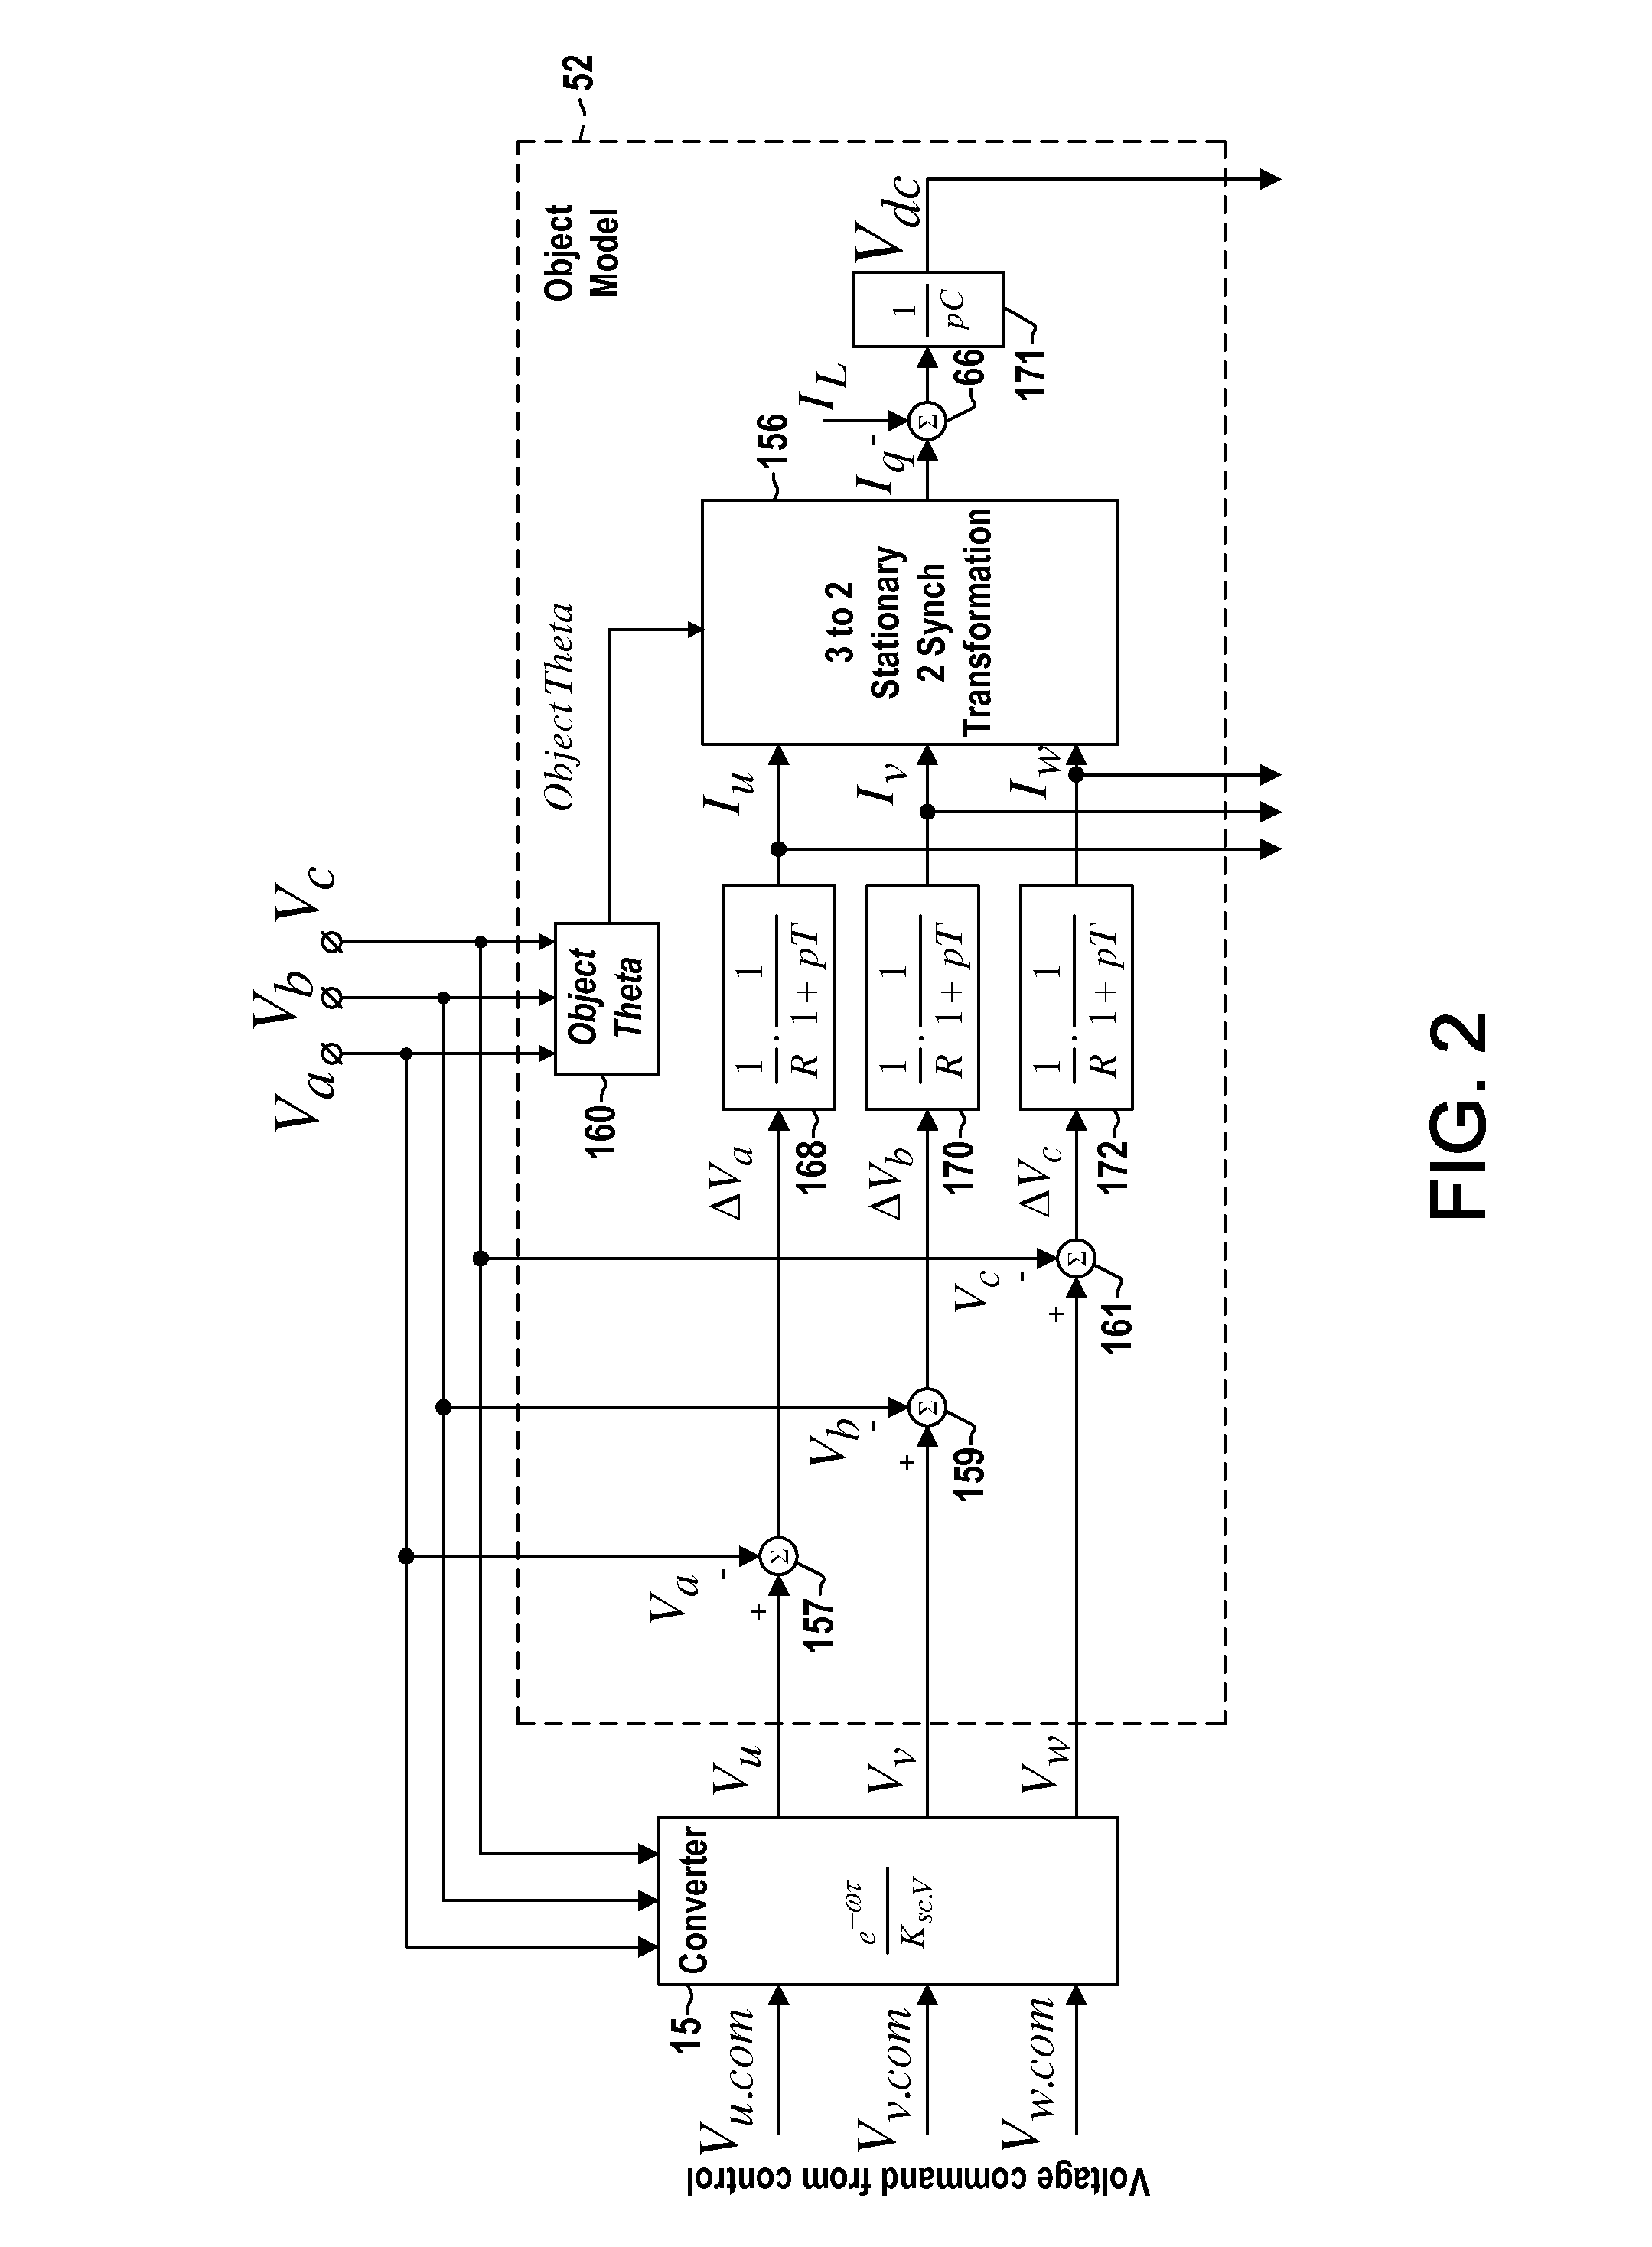 Method and apparatus for phase current balance in active converter with unbalanced AC line voltage source